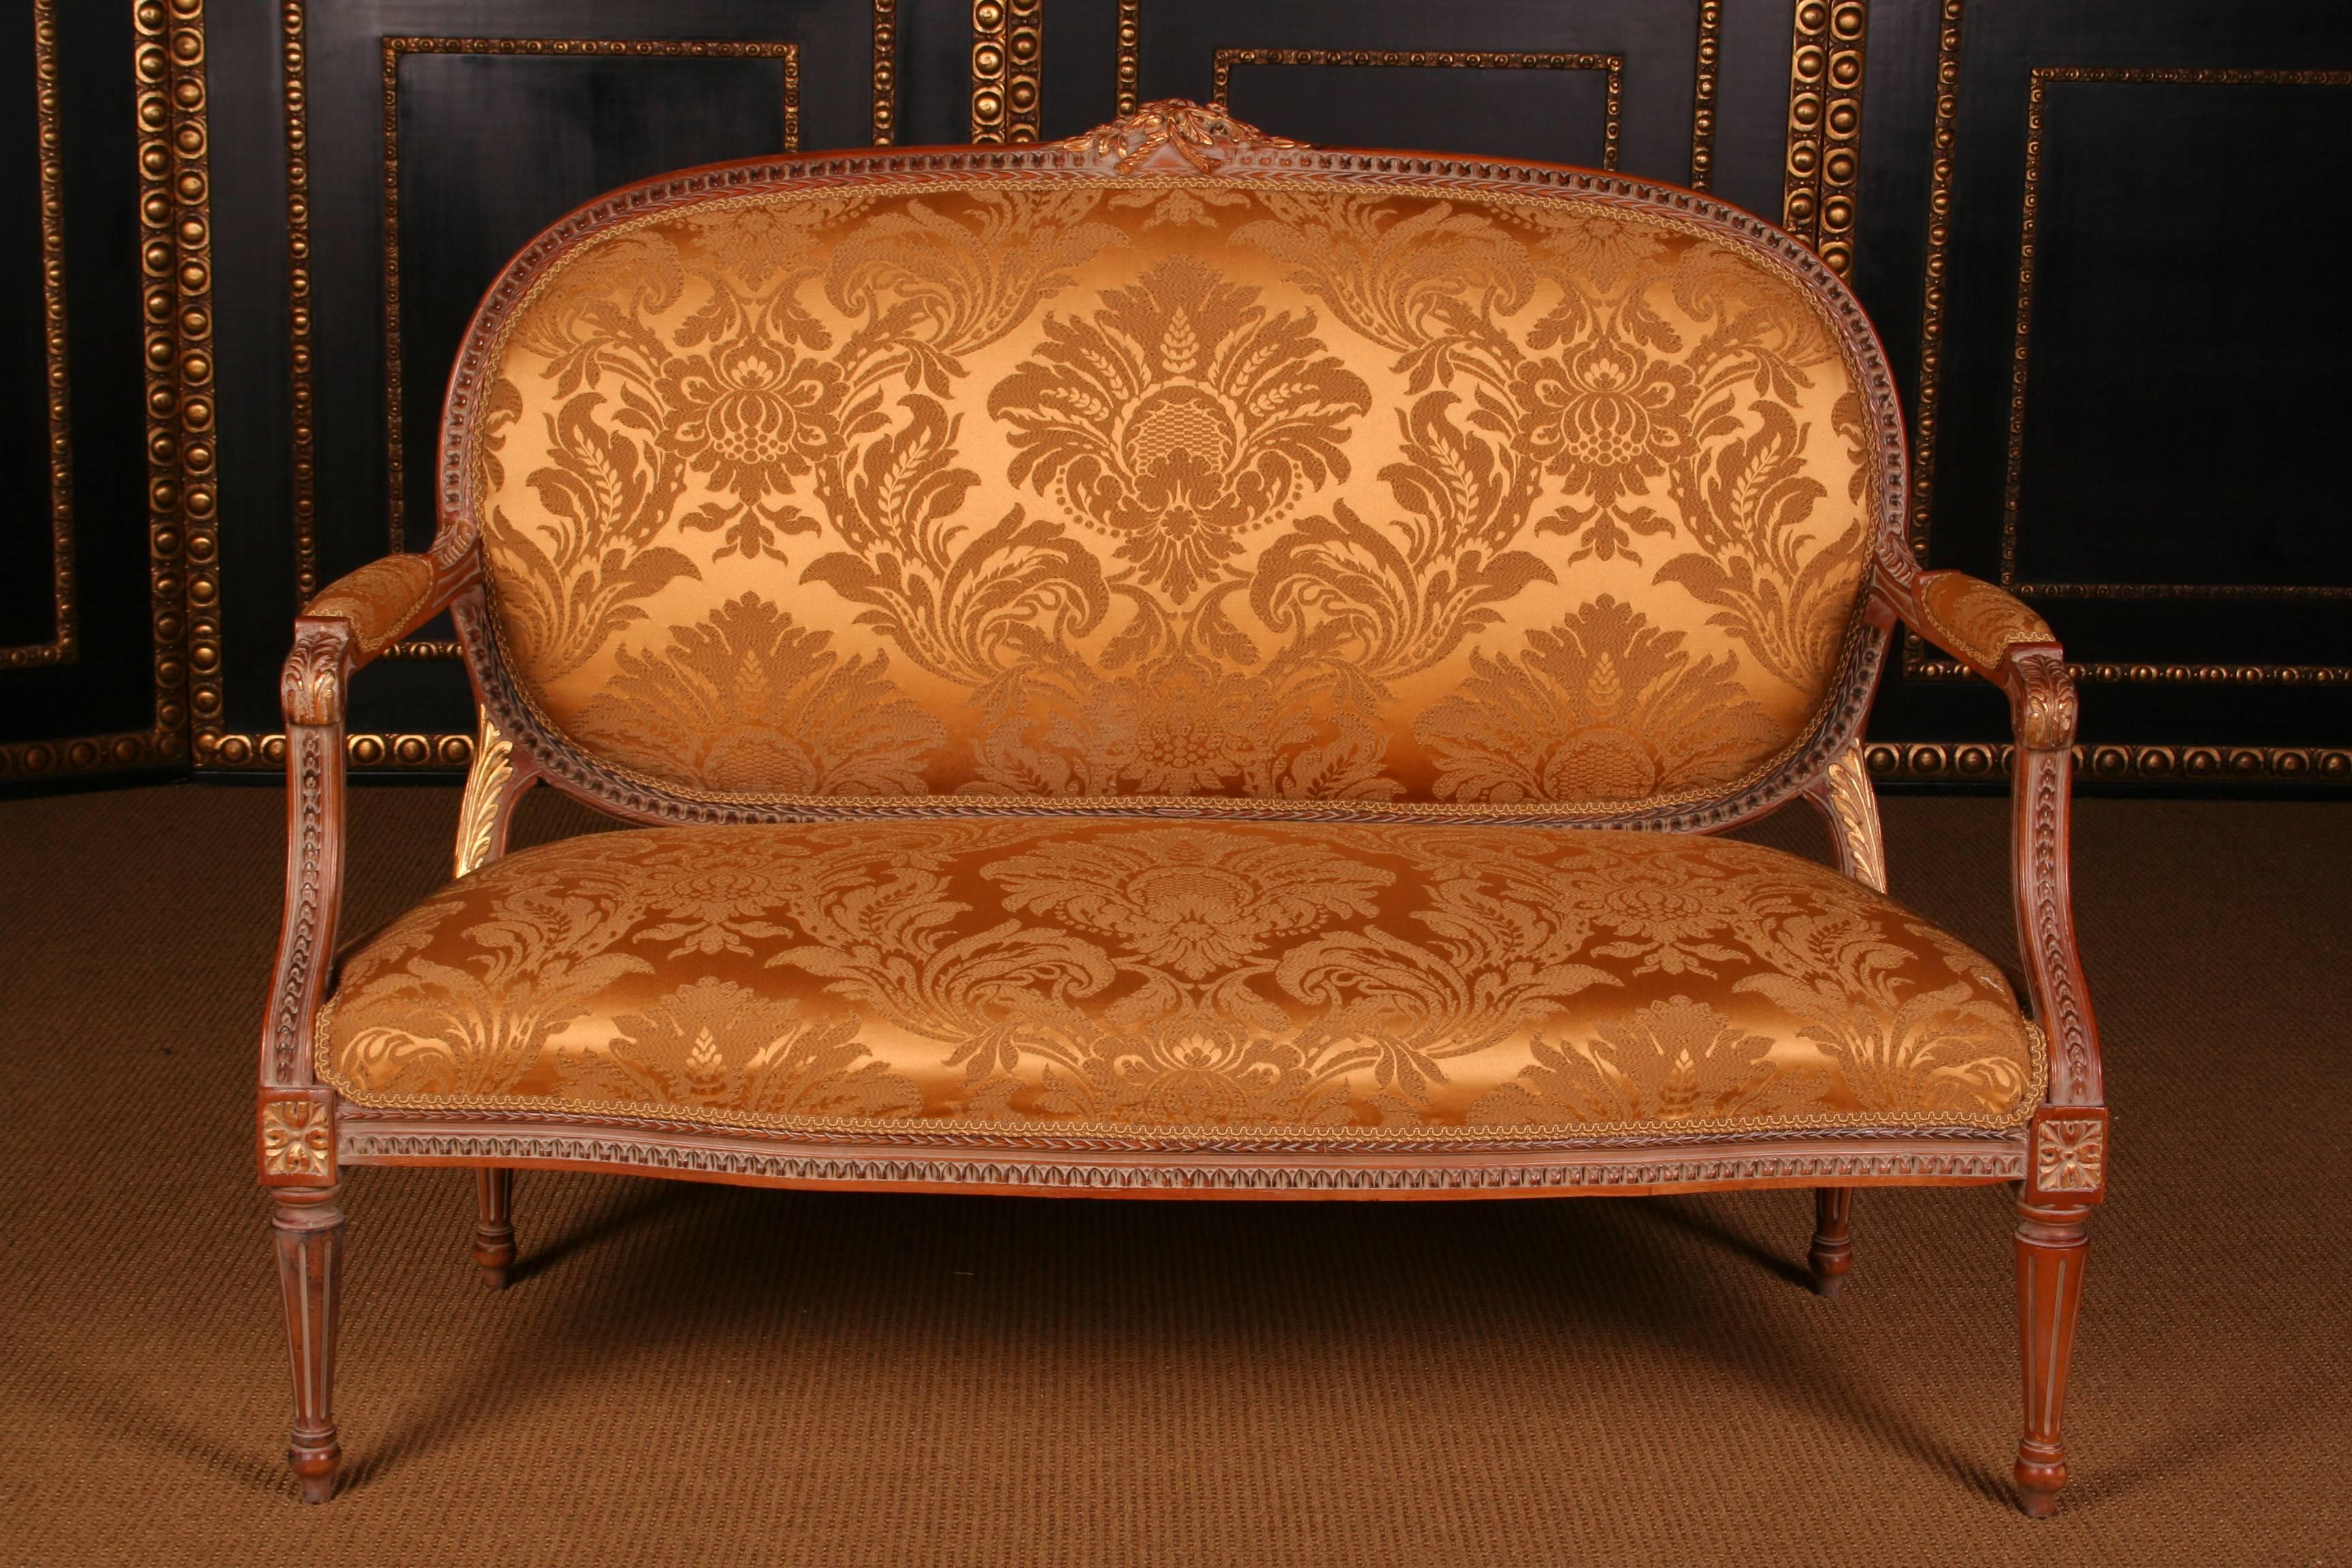 Unique French garniture in Louis 16th style
Solid beechwood, finely carved and patinated.  

Measurements:
Sofa: Width 135 cm, height 100 cm, depth 70 cm
Armchair: Width 67 cm, height 97 cm, depth 60 cm

(B-Dom-64).